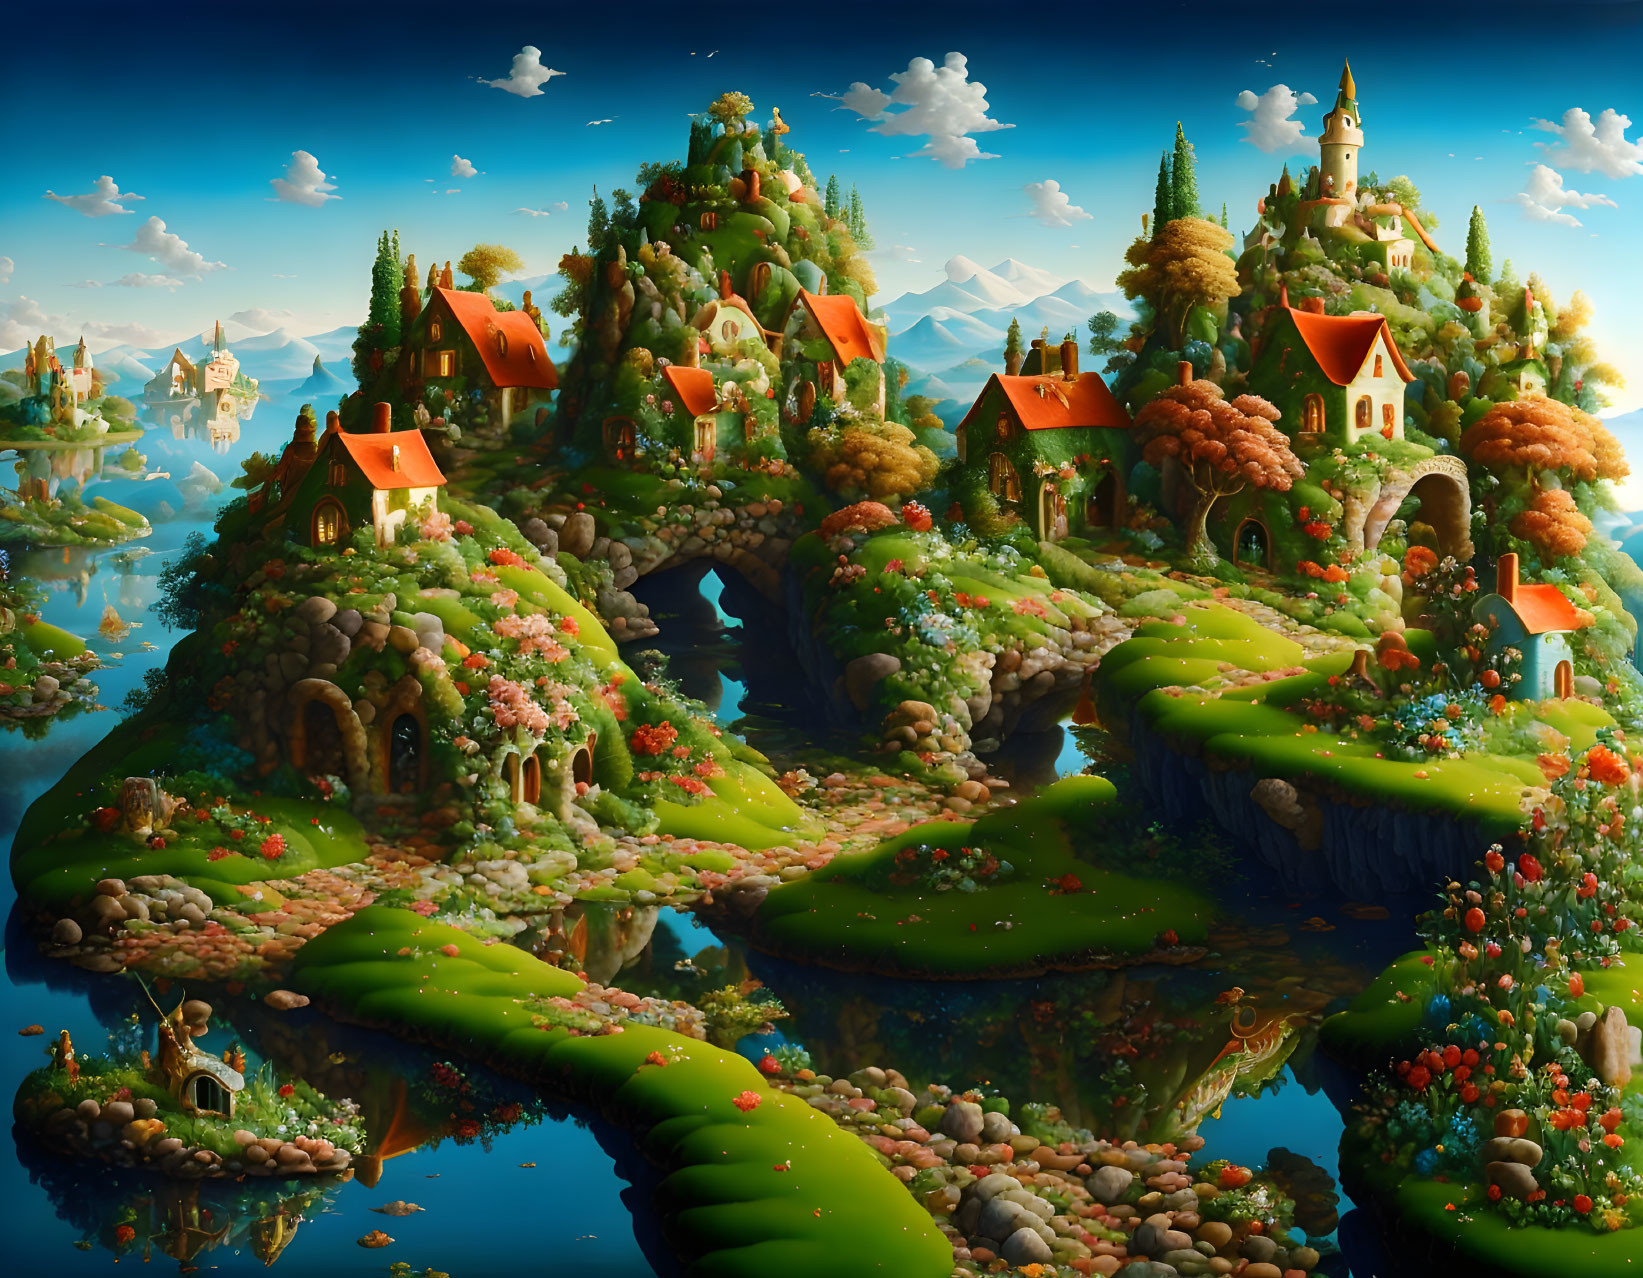 Colorful fantasy landscape with green islands, whimsical houses, flowers, and distant mountains.